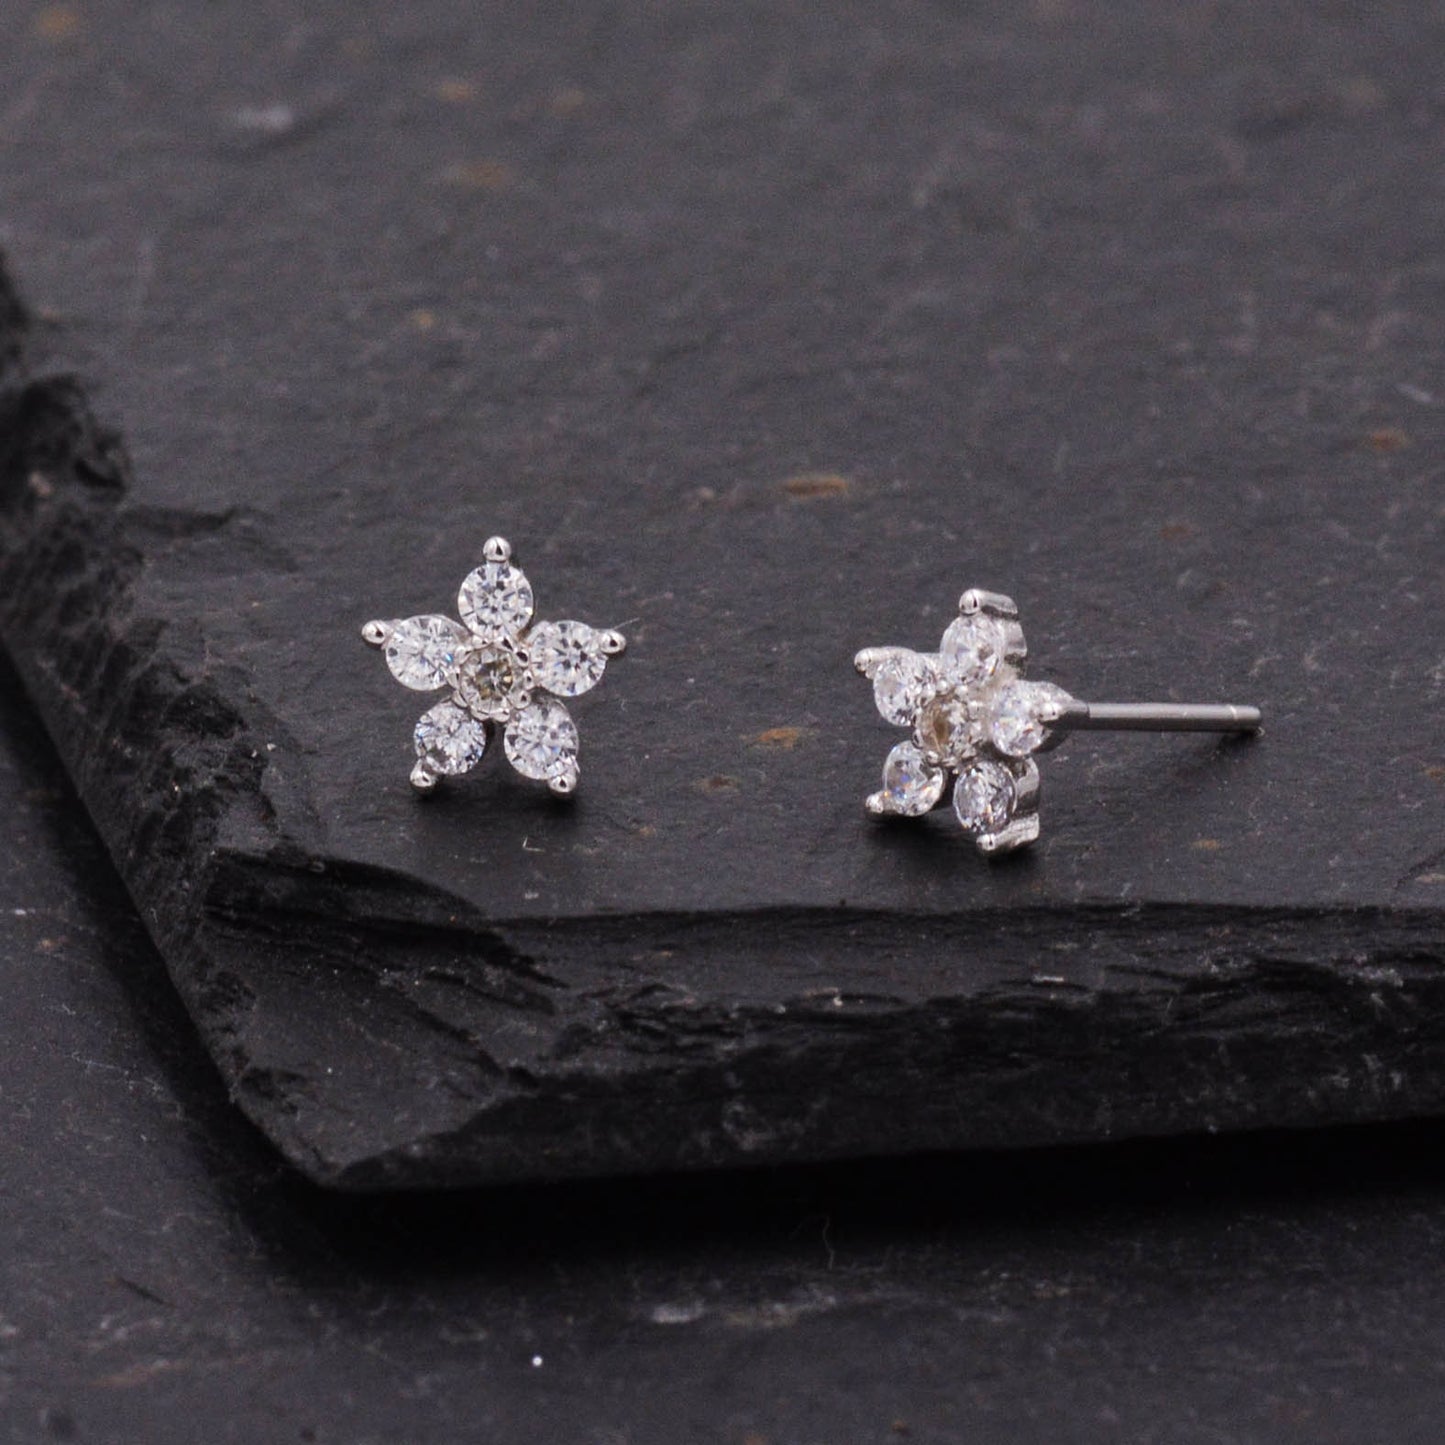 Very Sparkly Forget-me-not Flower Dainty Stud Earrings in Sterling Silver with CZ Crystals, Nature Inspired Design, Delicate and Pretty